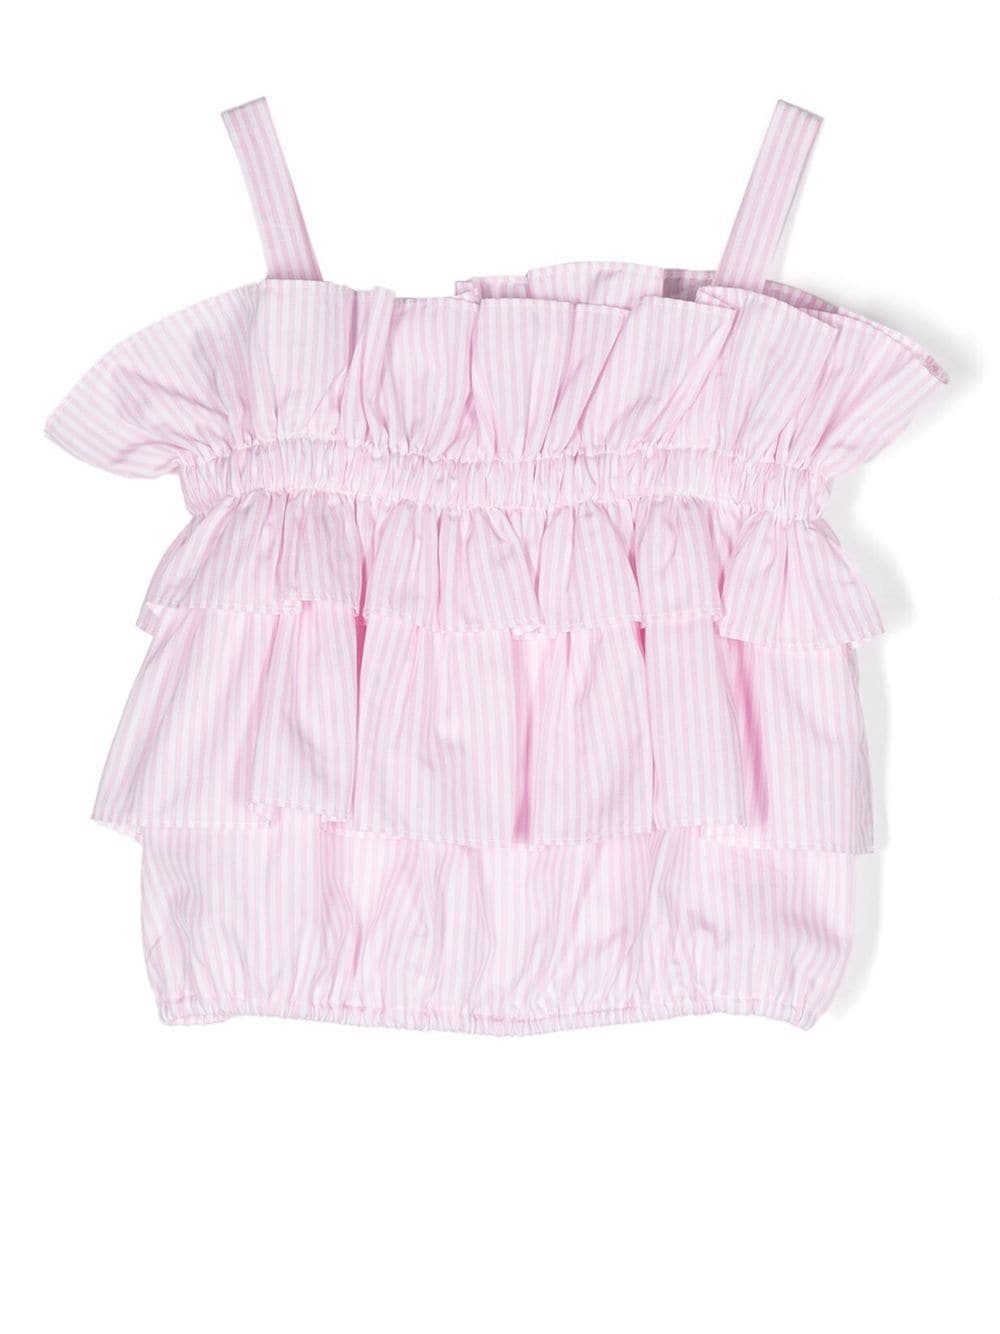 Lapin House ruffled striped sleeveless top - Pink von Lapin House